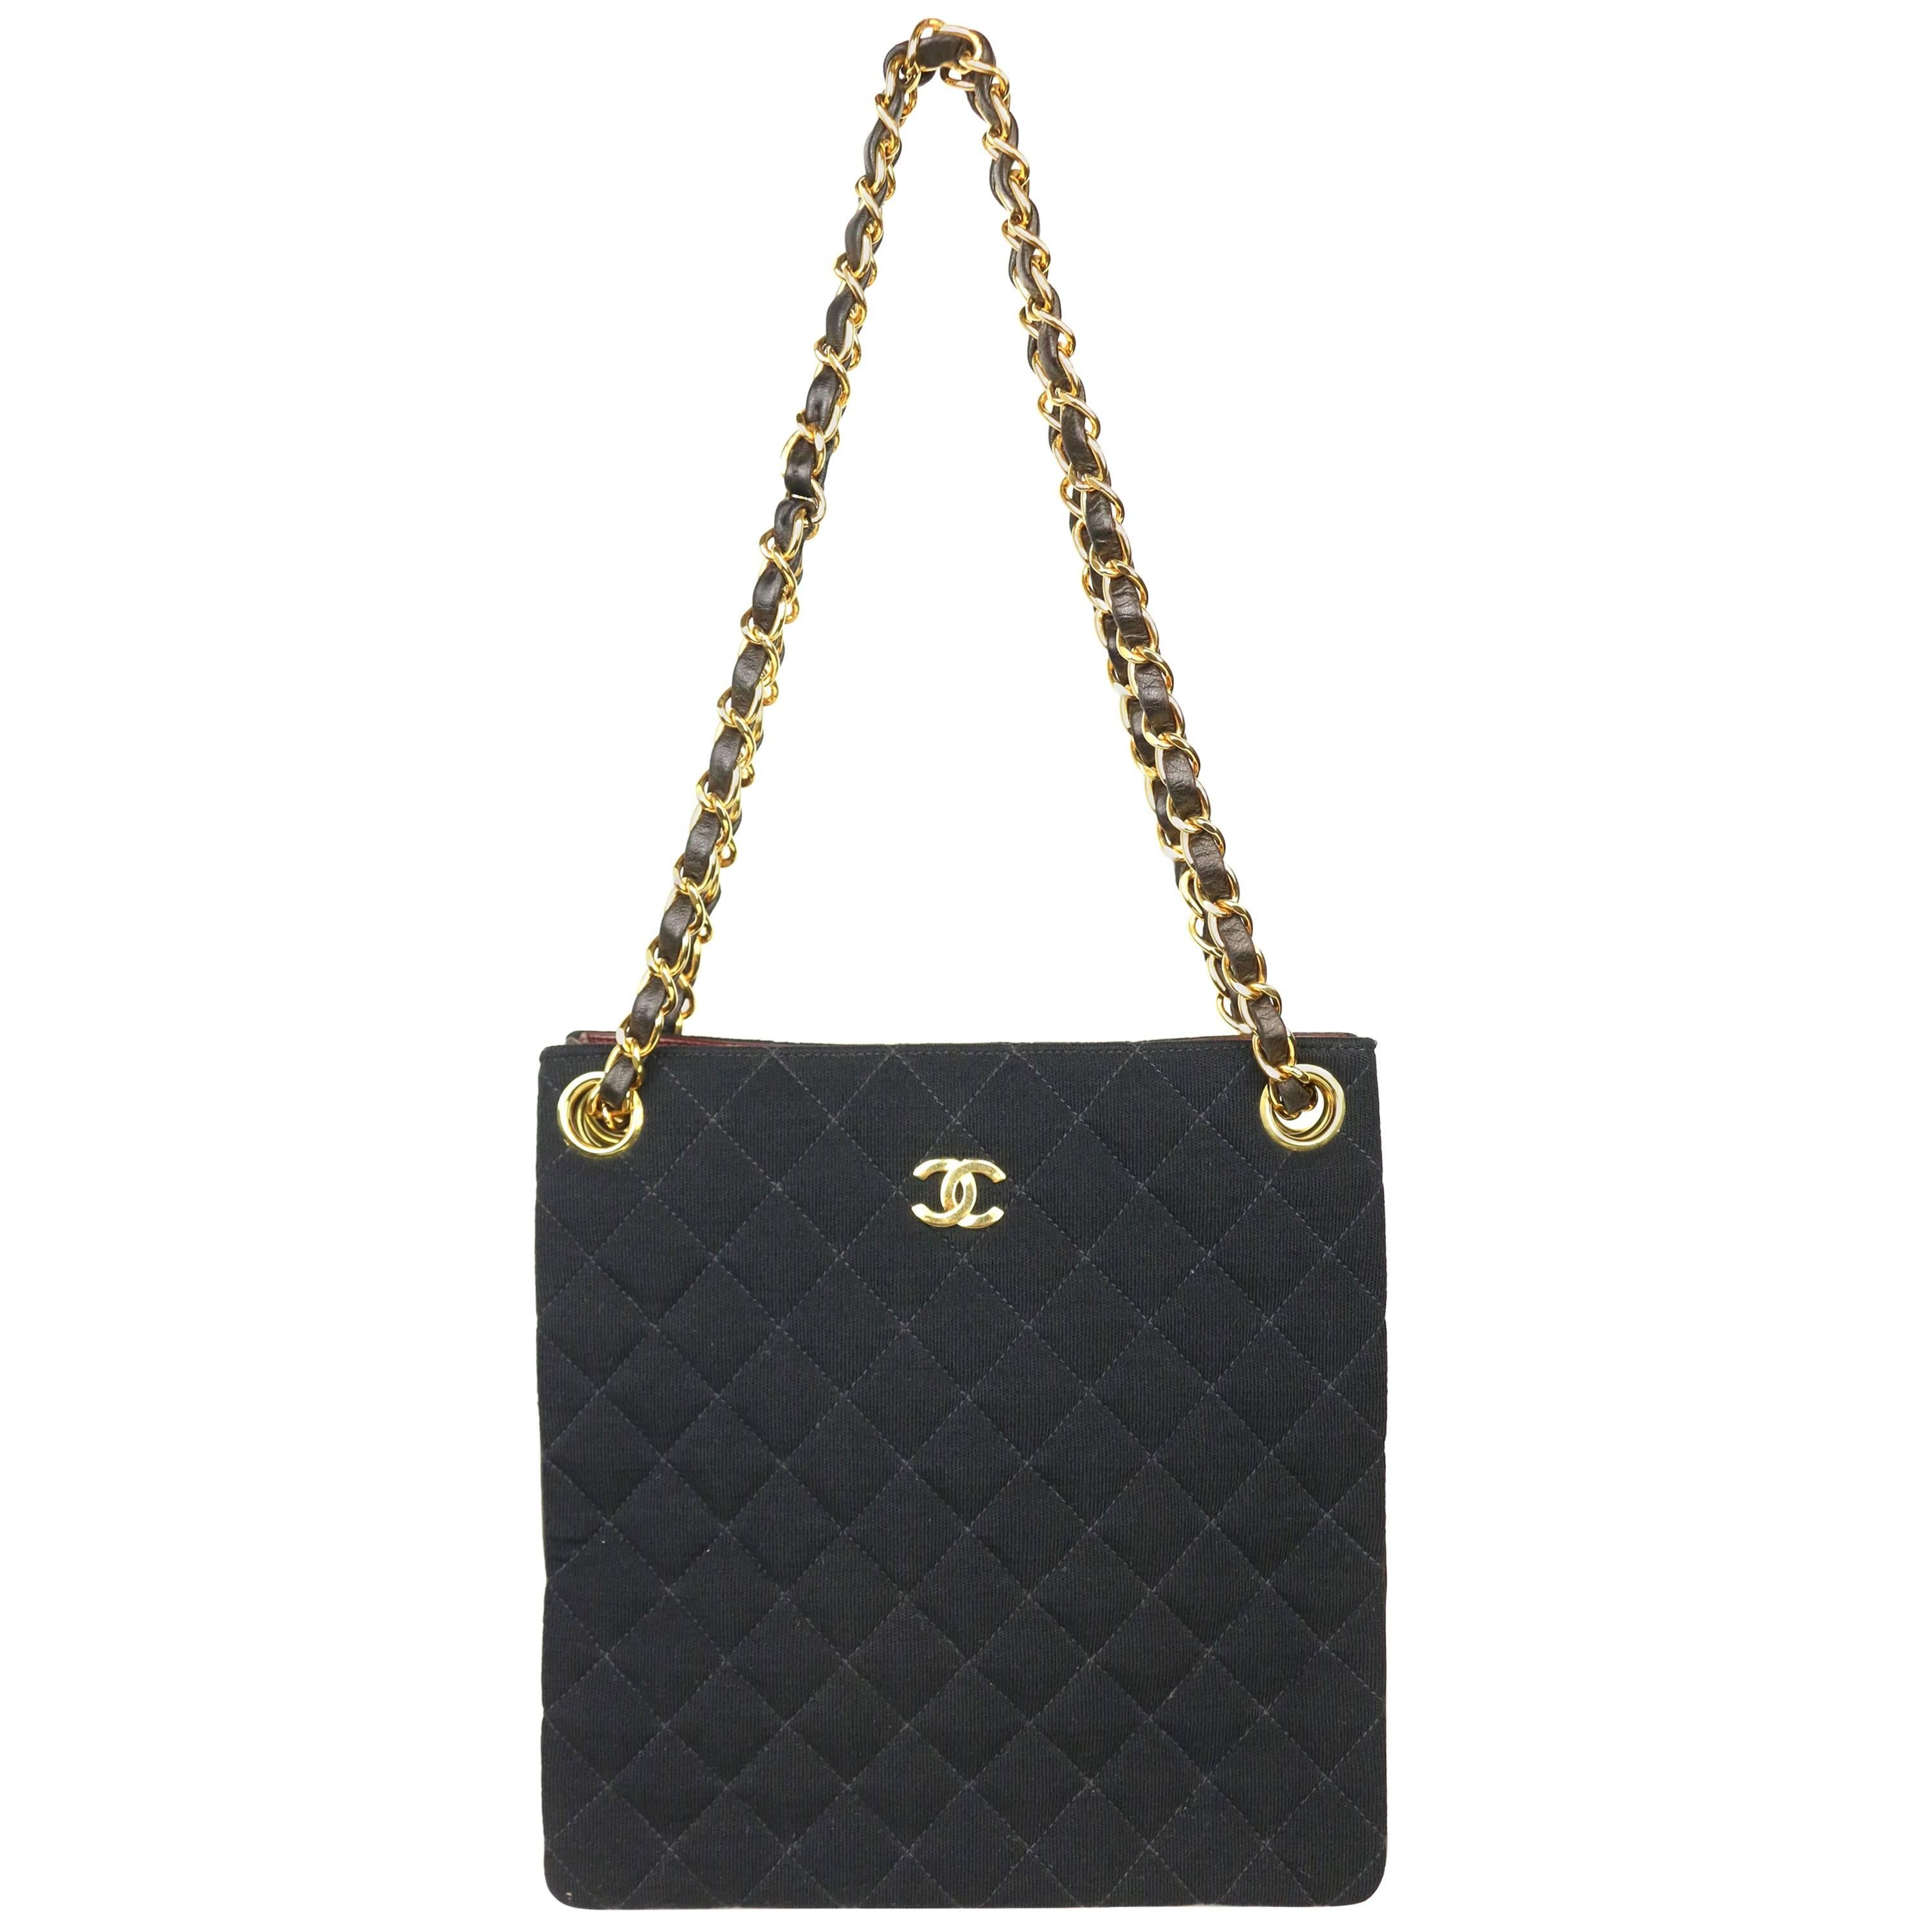 Chanel Black Quilted Cotton and Leather Gold Chain Shoulder Bag 